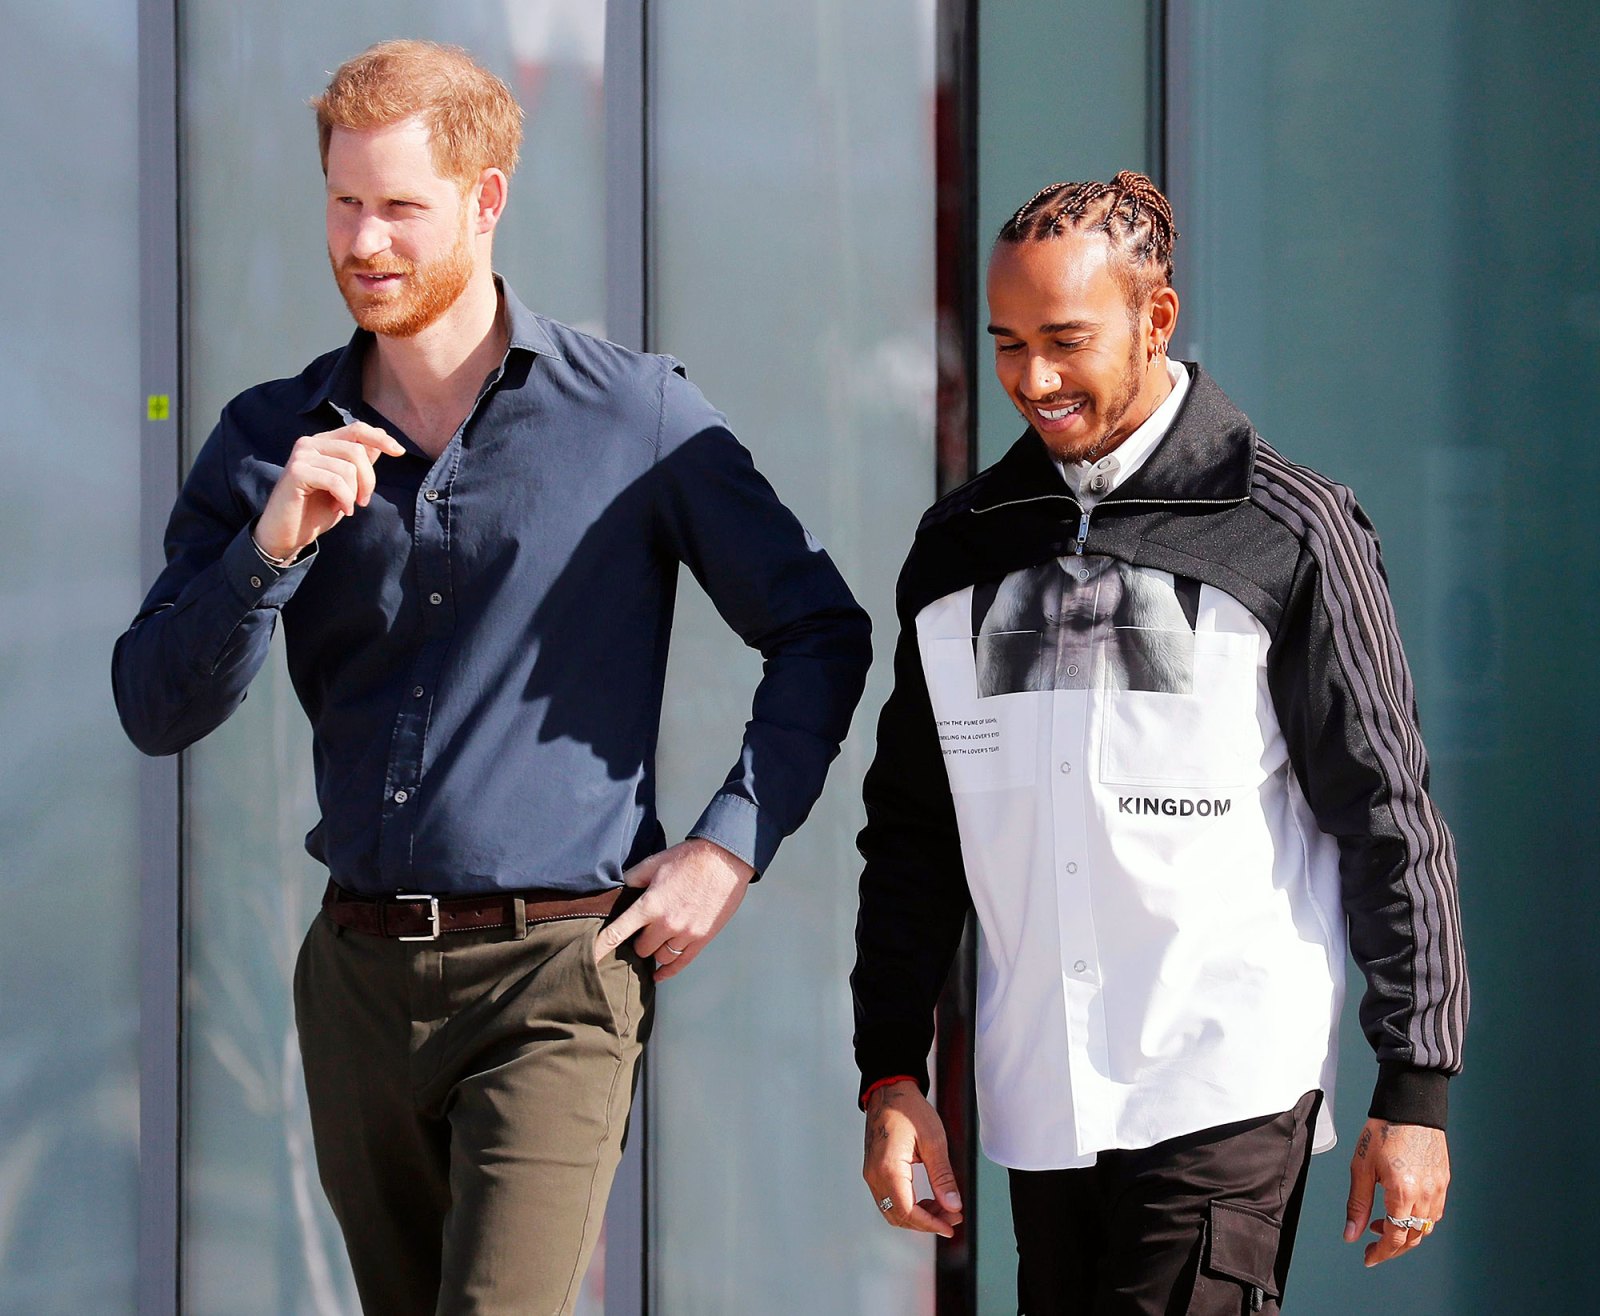 Prince Harry Makes Solo Appearance with Lewis Hamilton During Farewell Tour of Royal Engagement